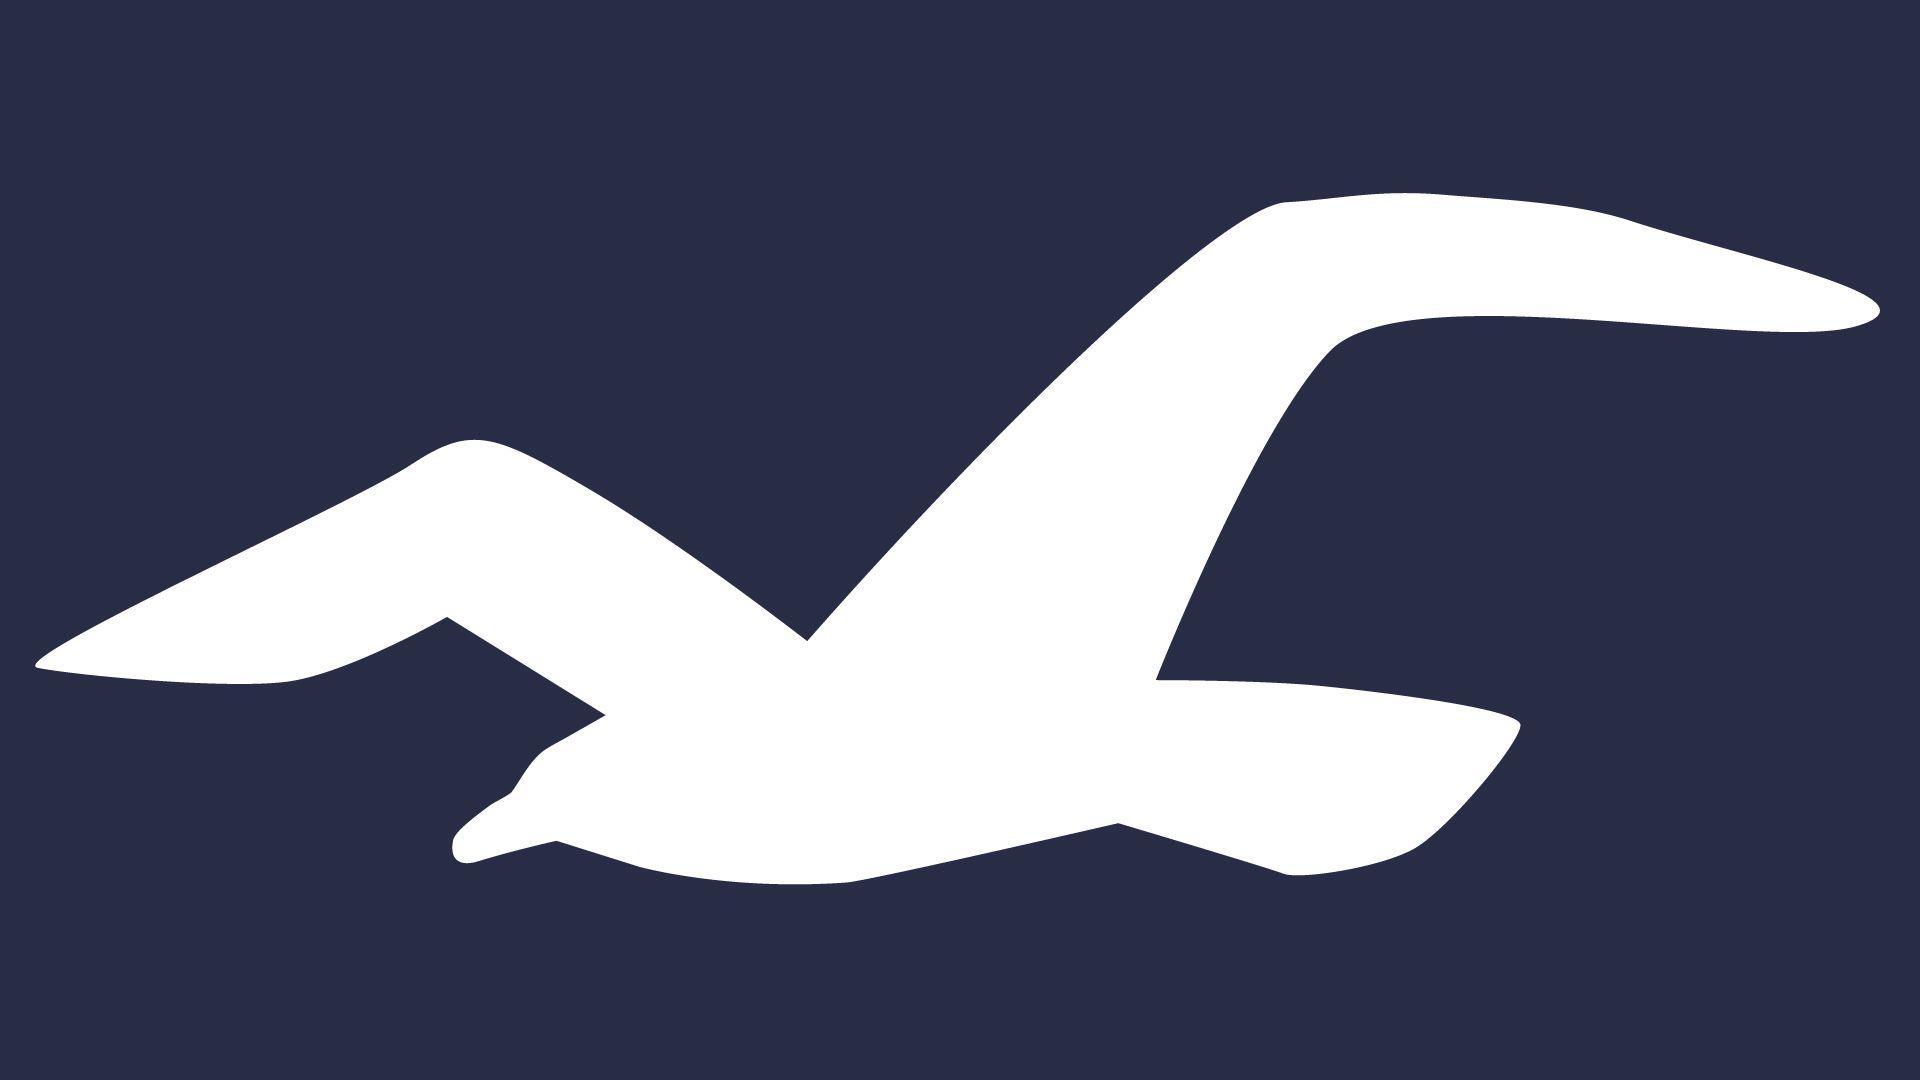 Hollister Logo - Hollister Logo, Hollister Symbol Meaning, History and Evolution